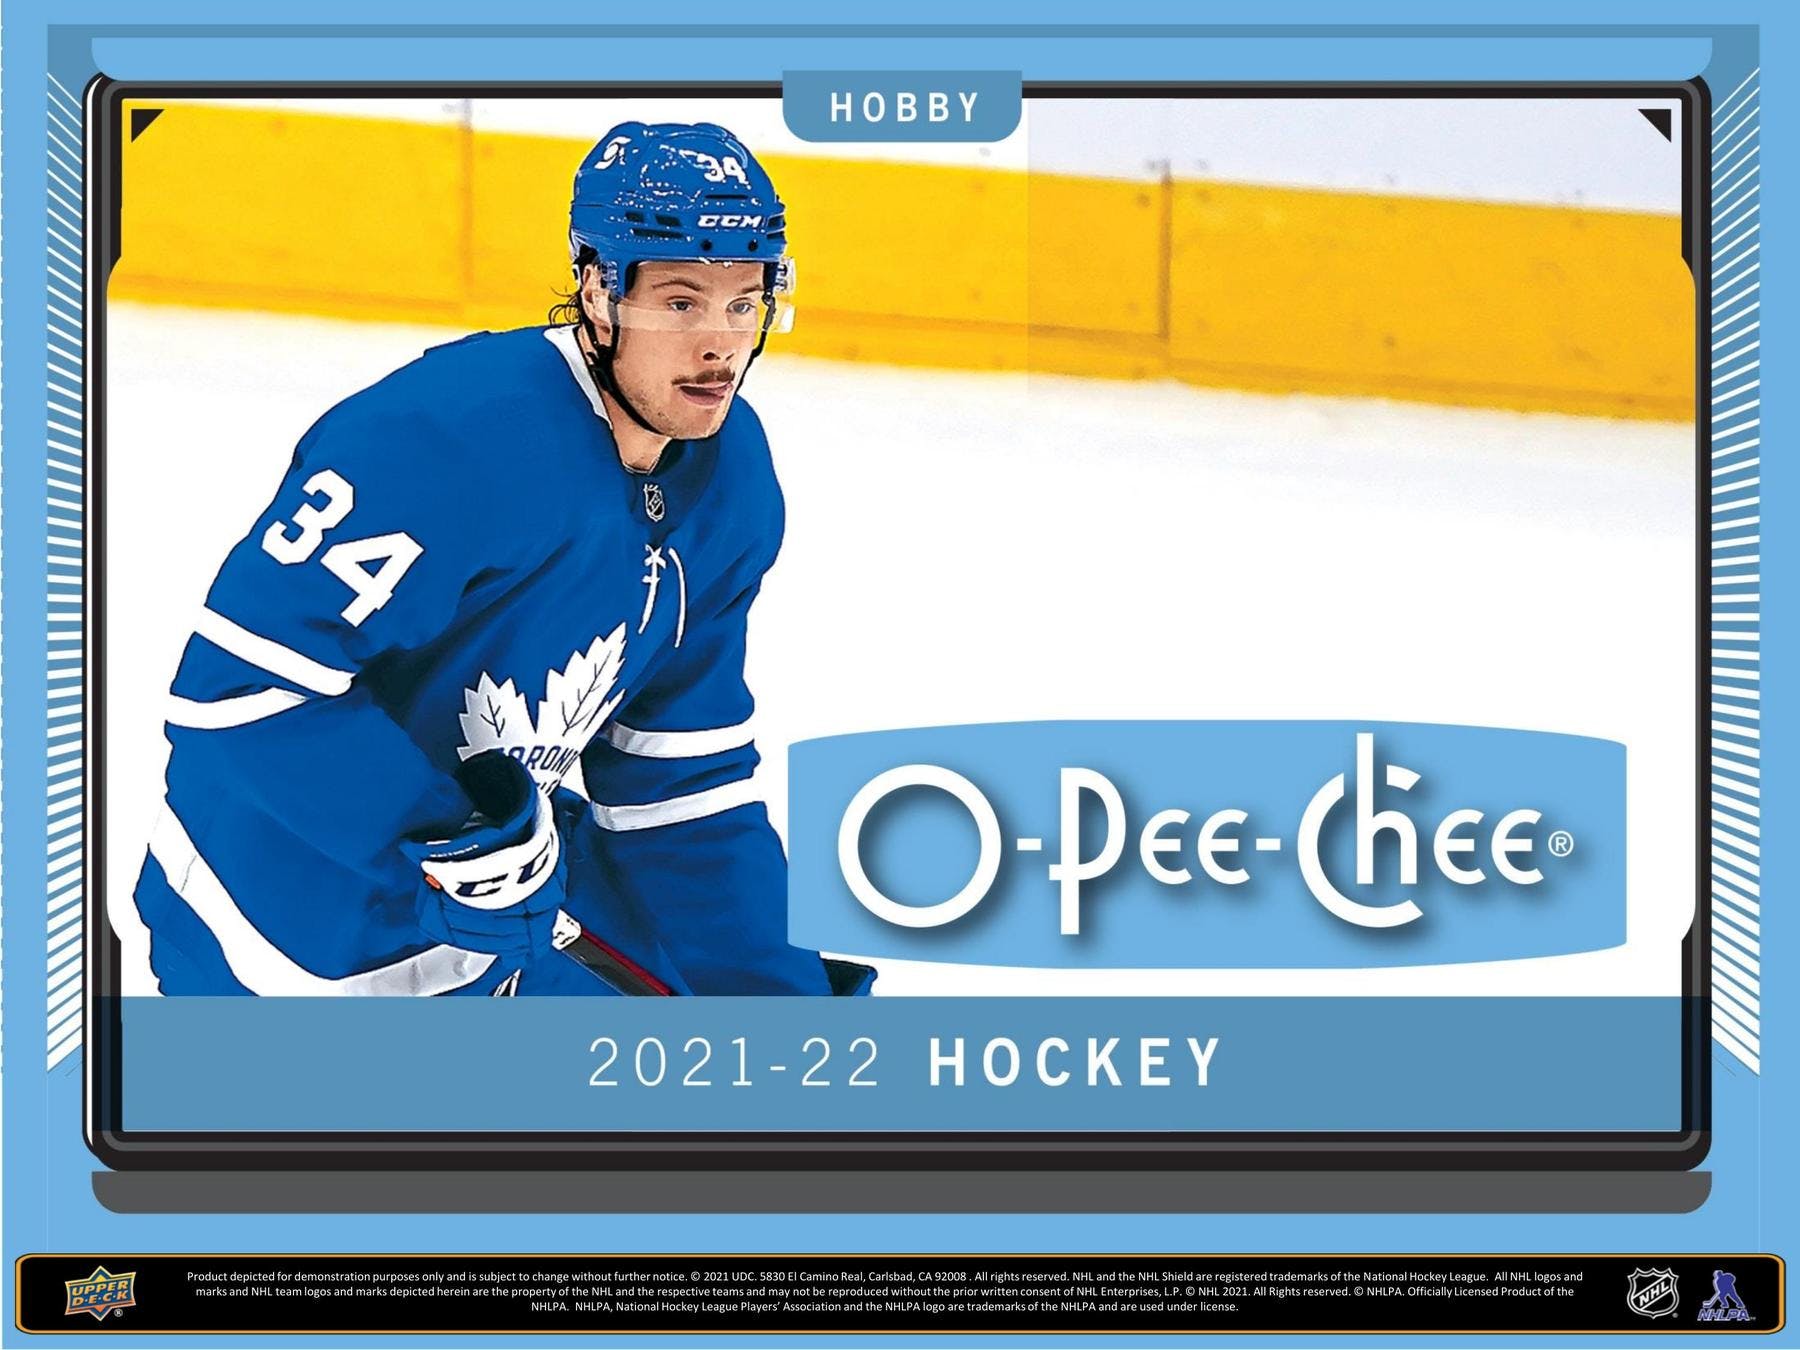 2021-22 O-Pee-Chee New Jersey Devils Team Set (No SPs) of 14 Cards